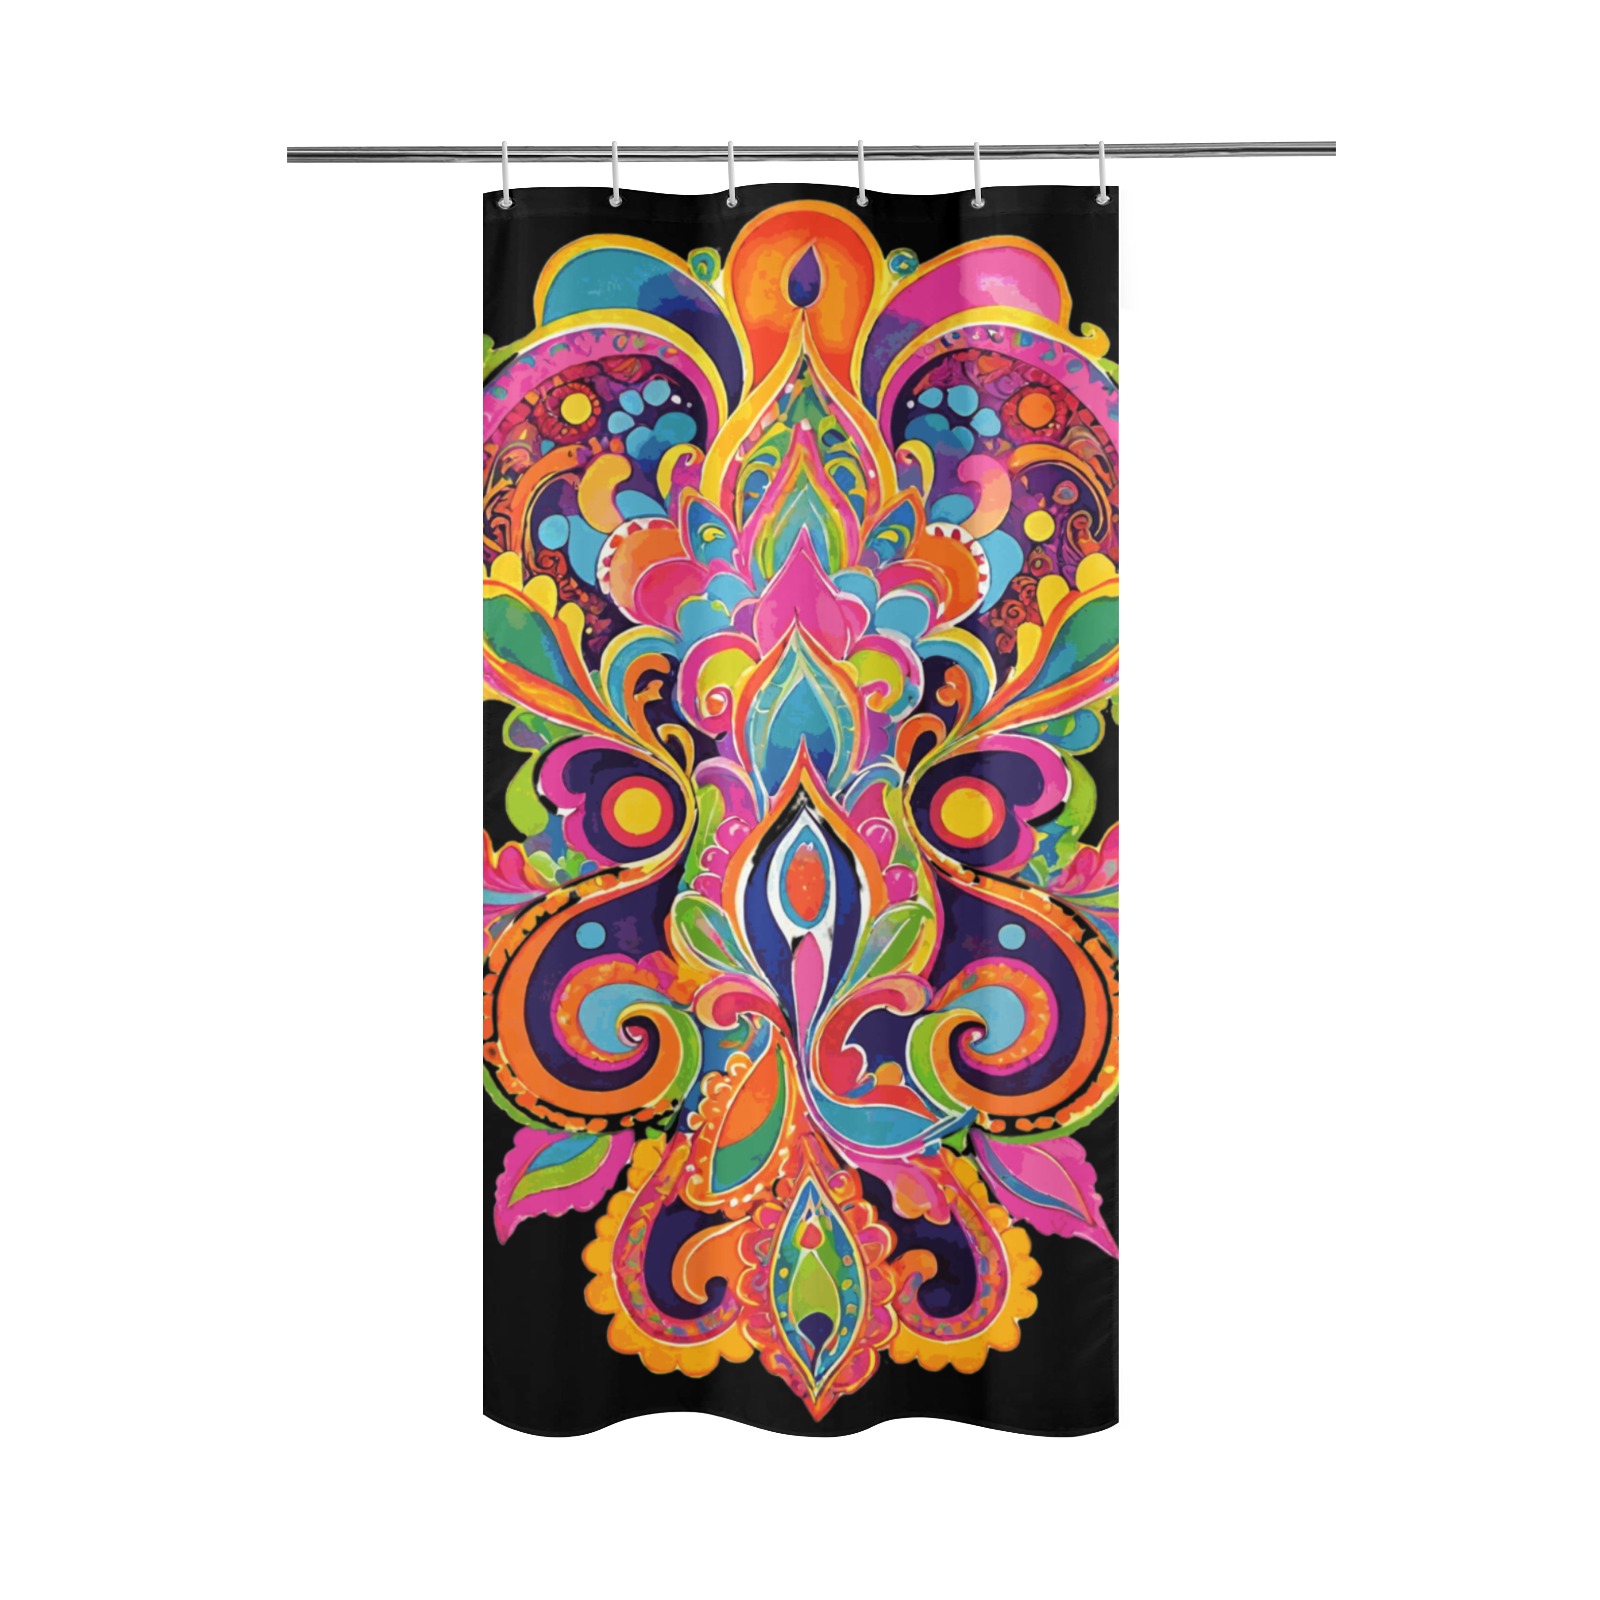 Abstract Retro Hippie Paisley Floral Shower Curtain 36"x72"